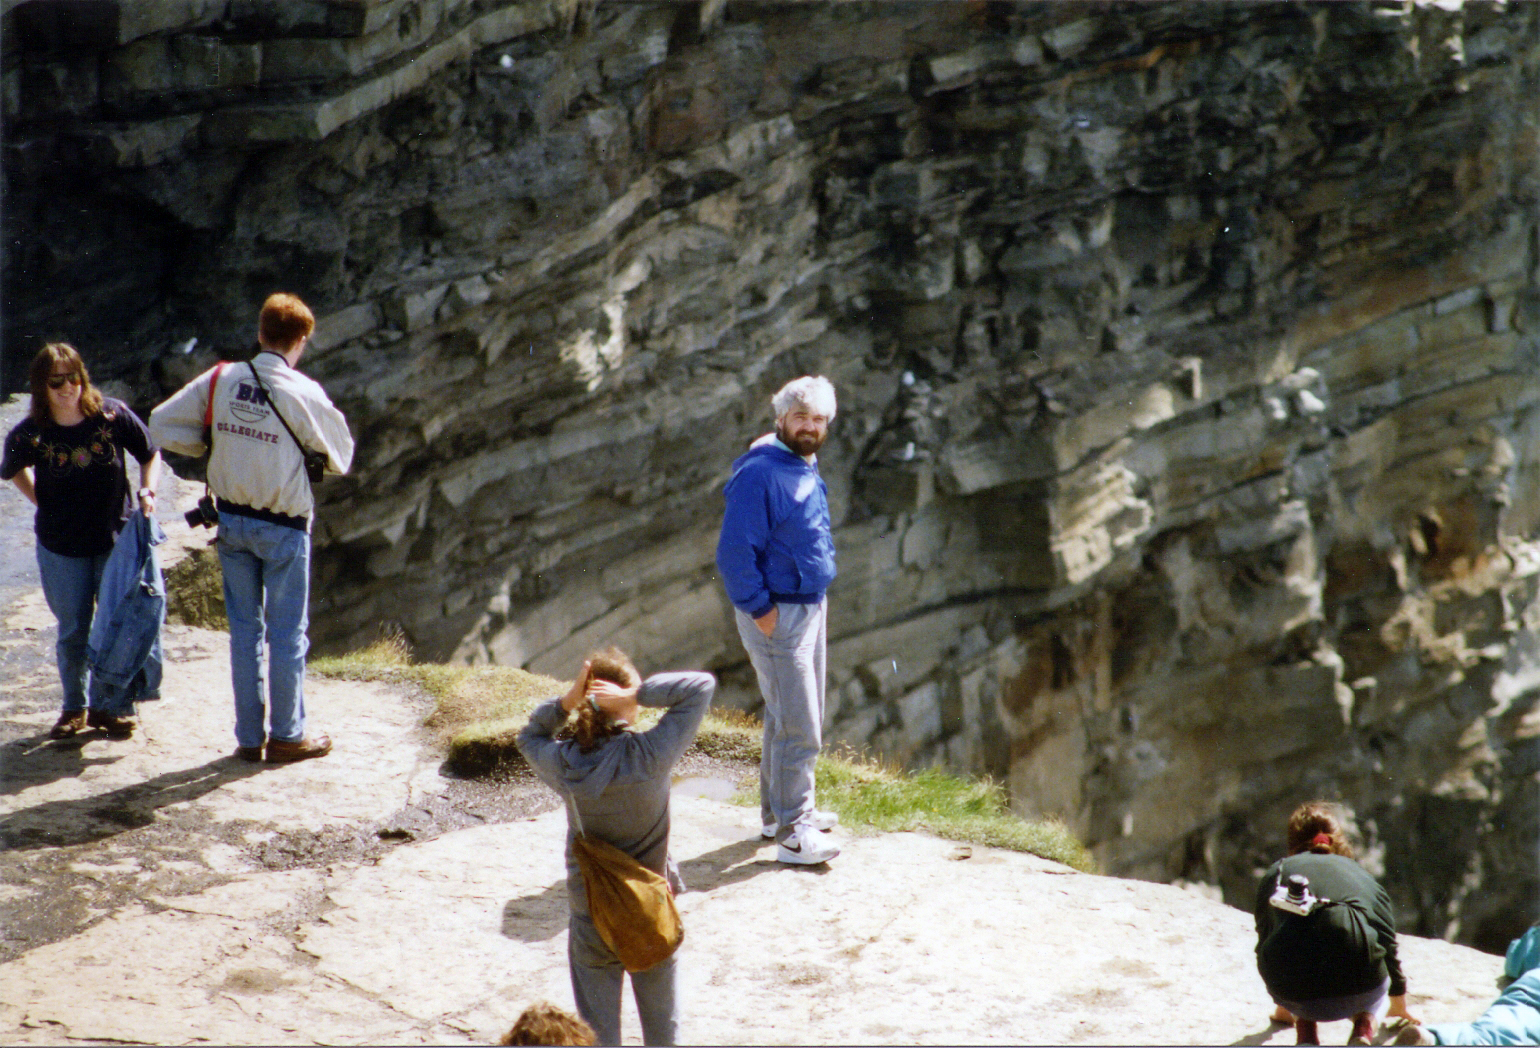 Steve, at the edge of the Cliffs - photo from August 1992